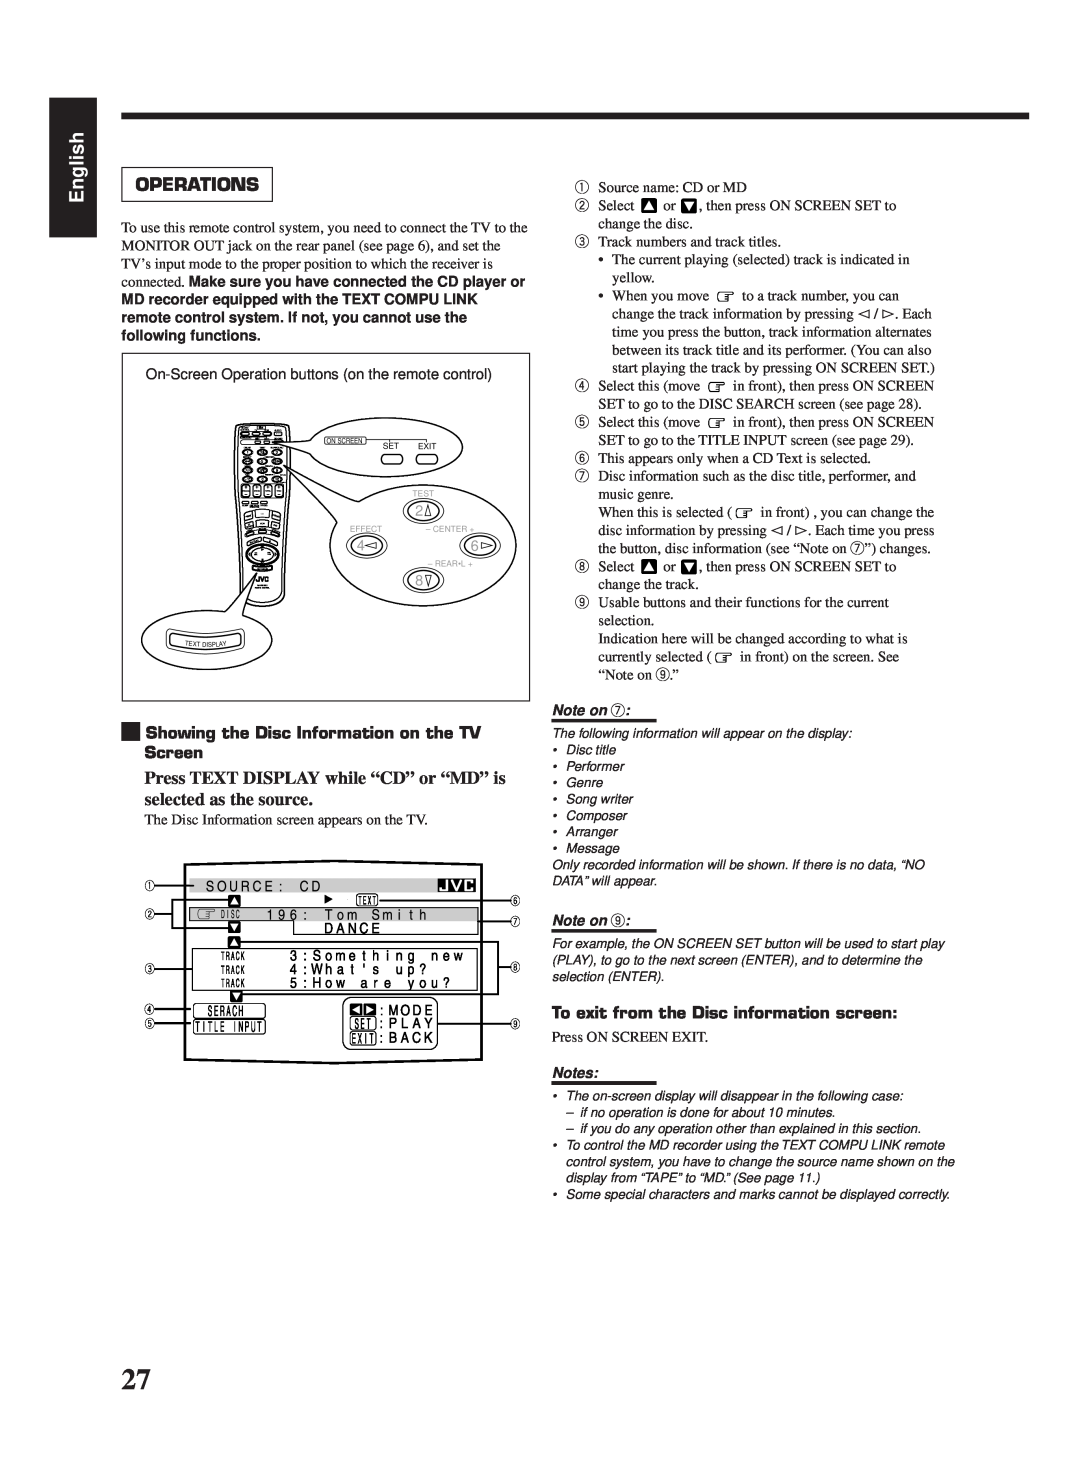 JVC LVT0142-006A, RX-669PGD manual English, Operations, Showing the Disc Information on the TV Screen 